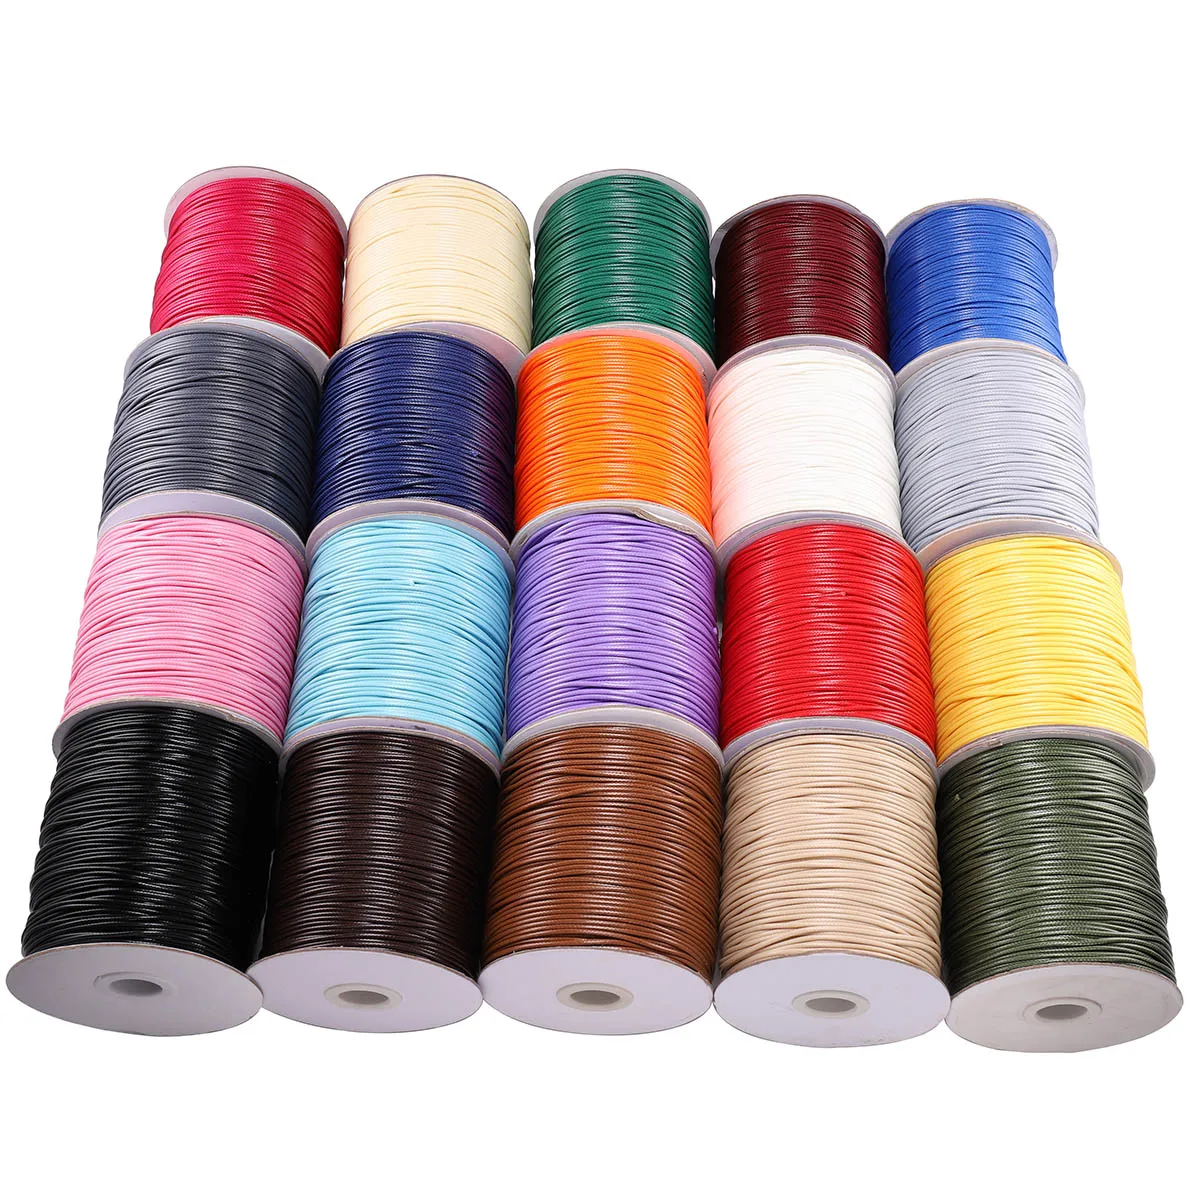 10m/lot 26 Color Leather Line Waxed Cord Cotton Thread String